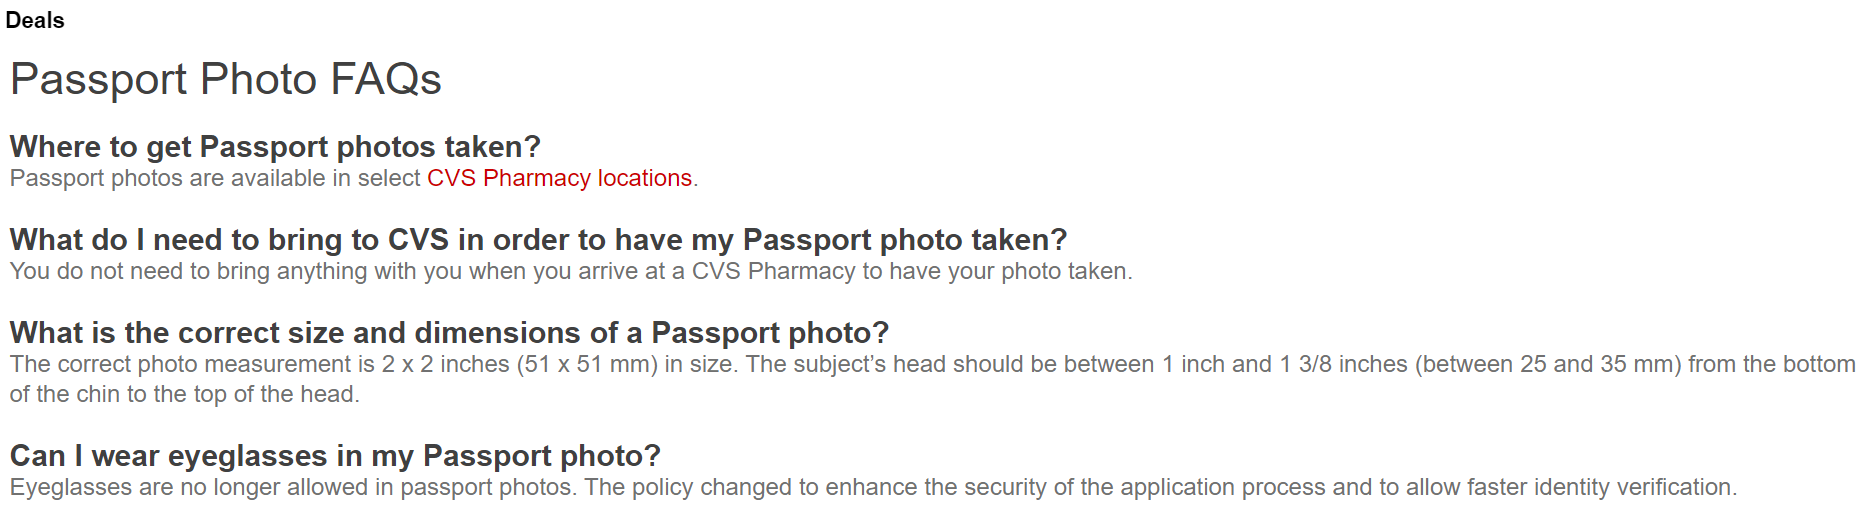 Which is the best place to get passport photos? A Simple review